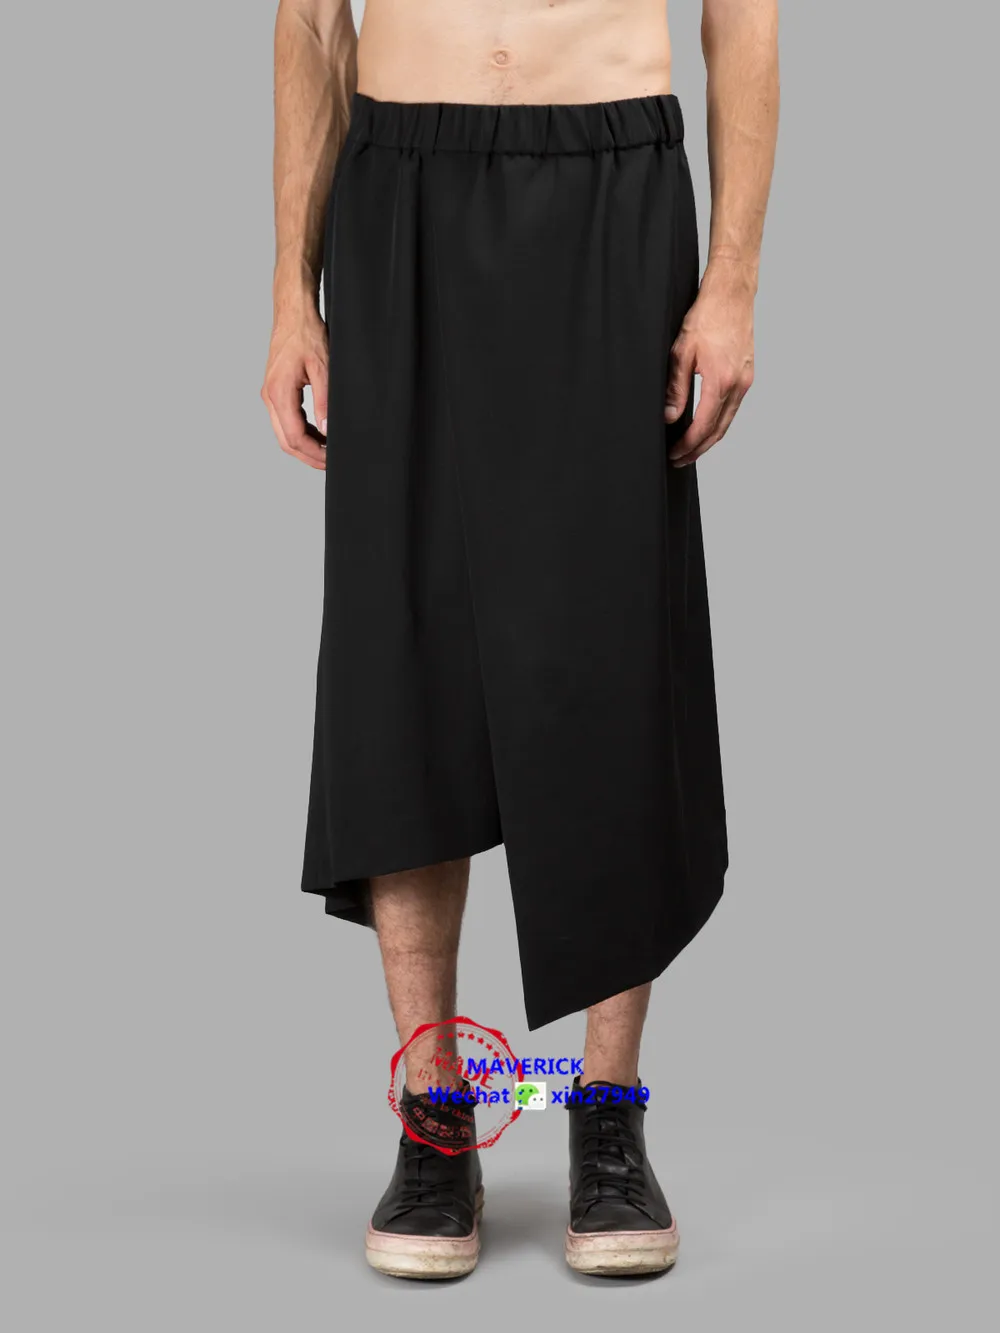 28-44 ! 2016 New Men's clothing fashion culottes asymmetrical sweep loose casual pants plus size singer costumes